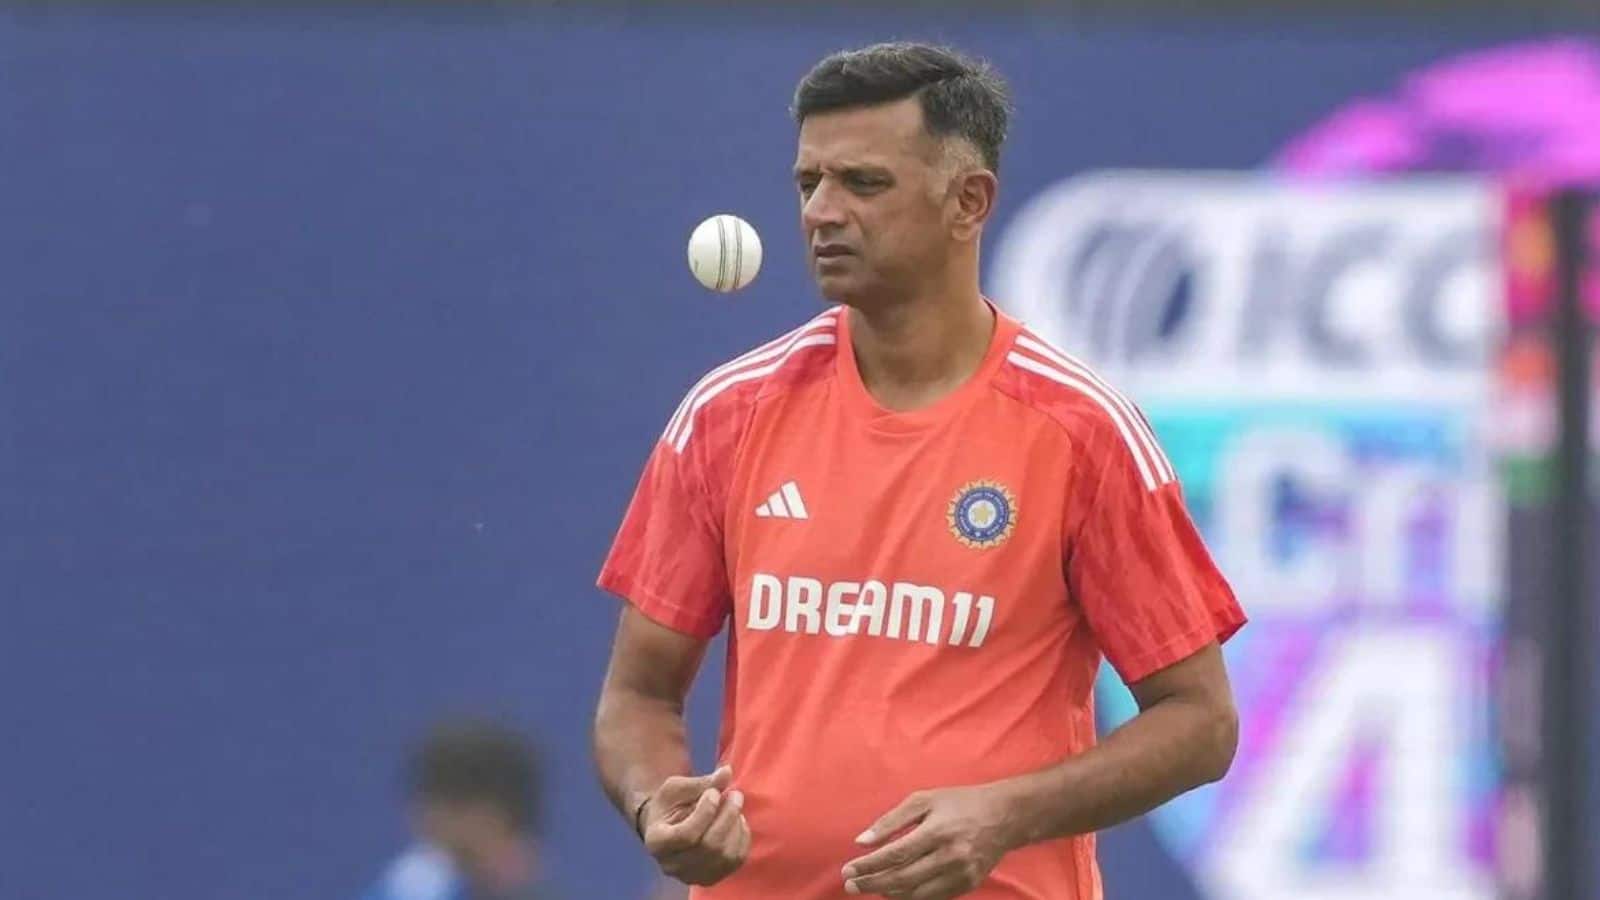 BCCI To Discuss Long-Term Contract Extension With Rahul Dravid